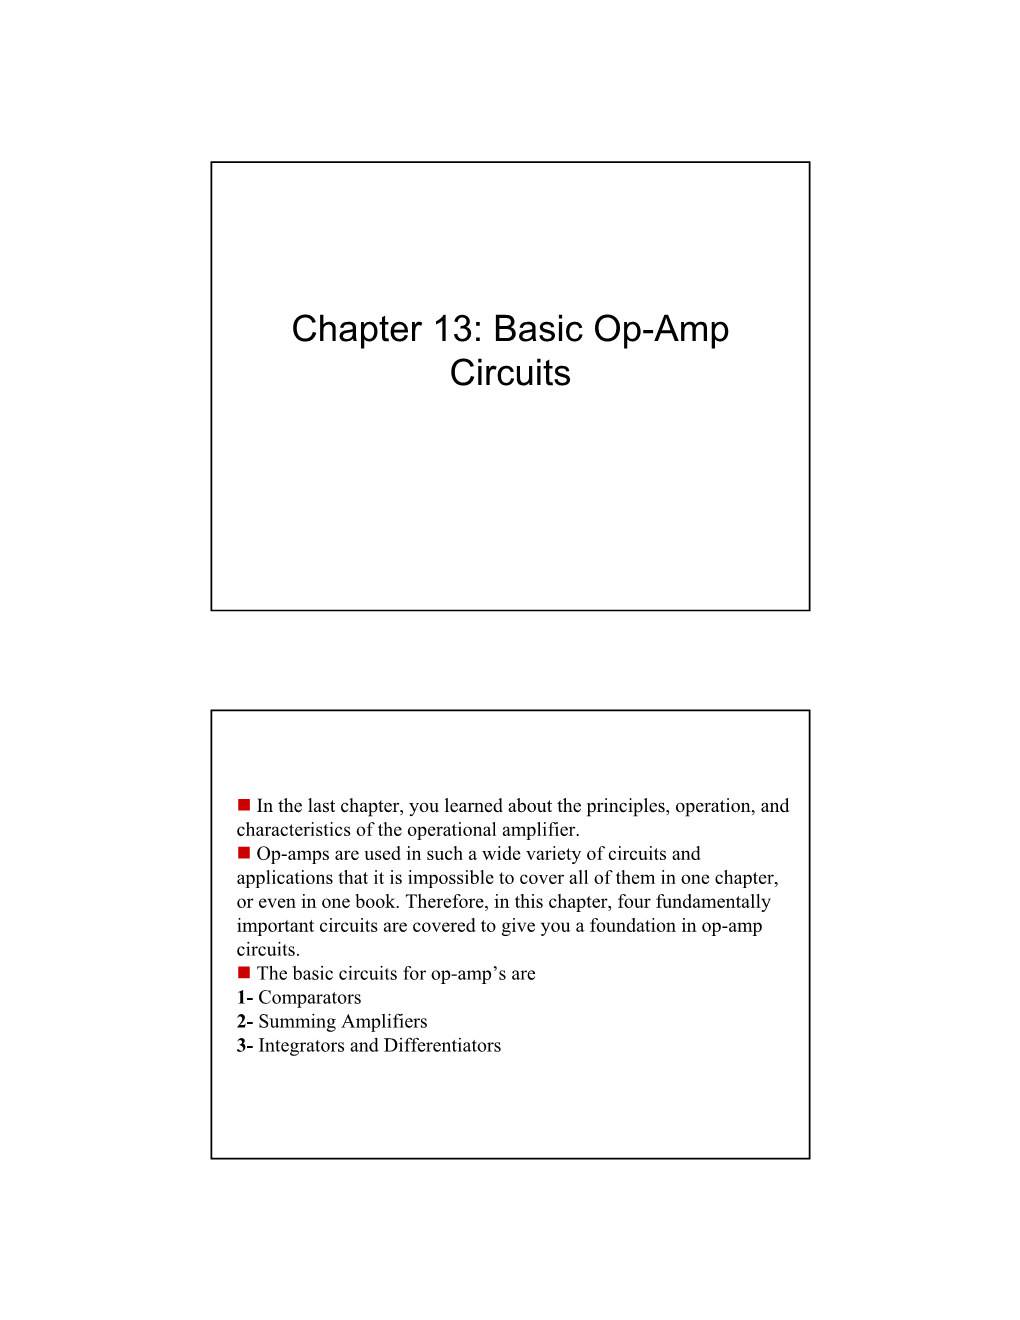 Chapter 13: Basic Op-Amp Circuits